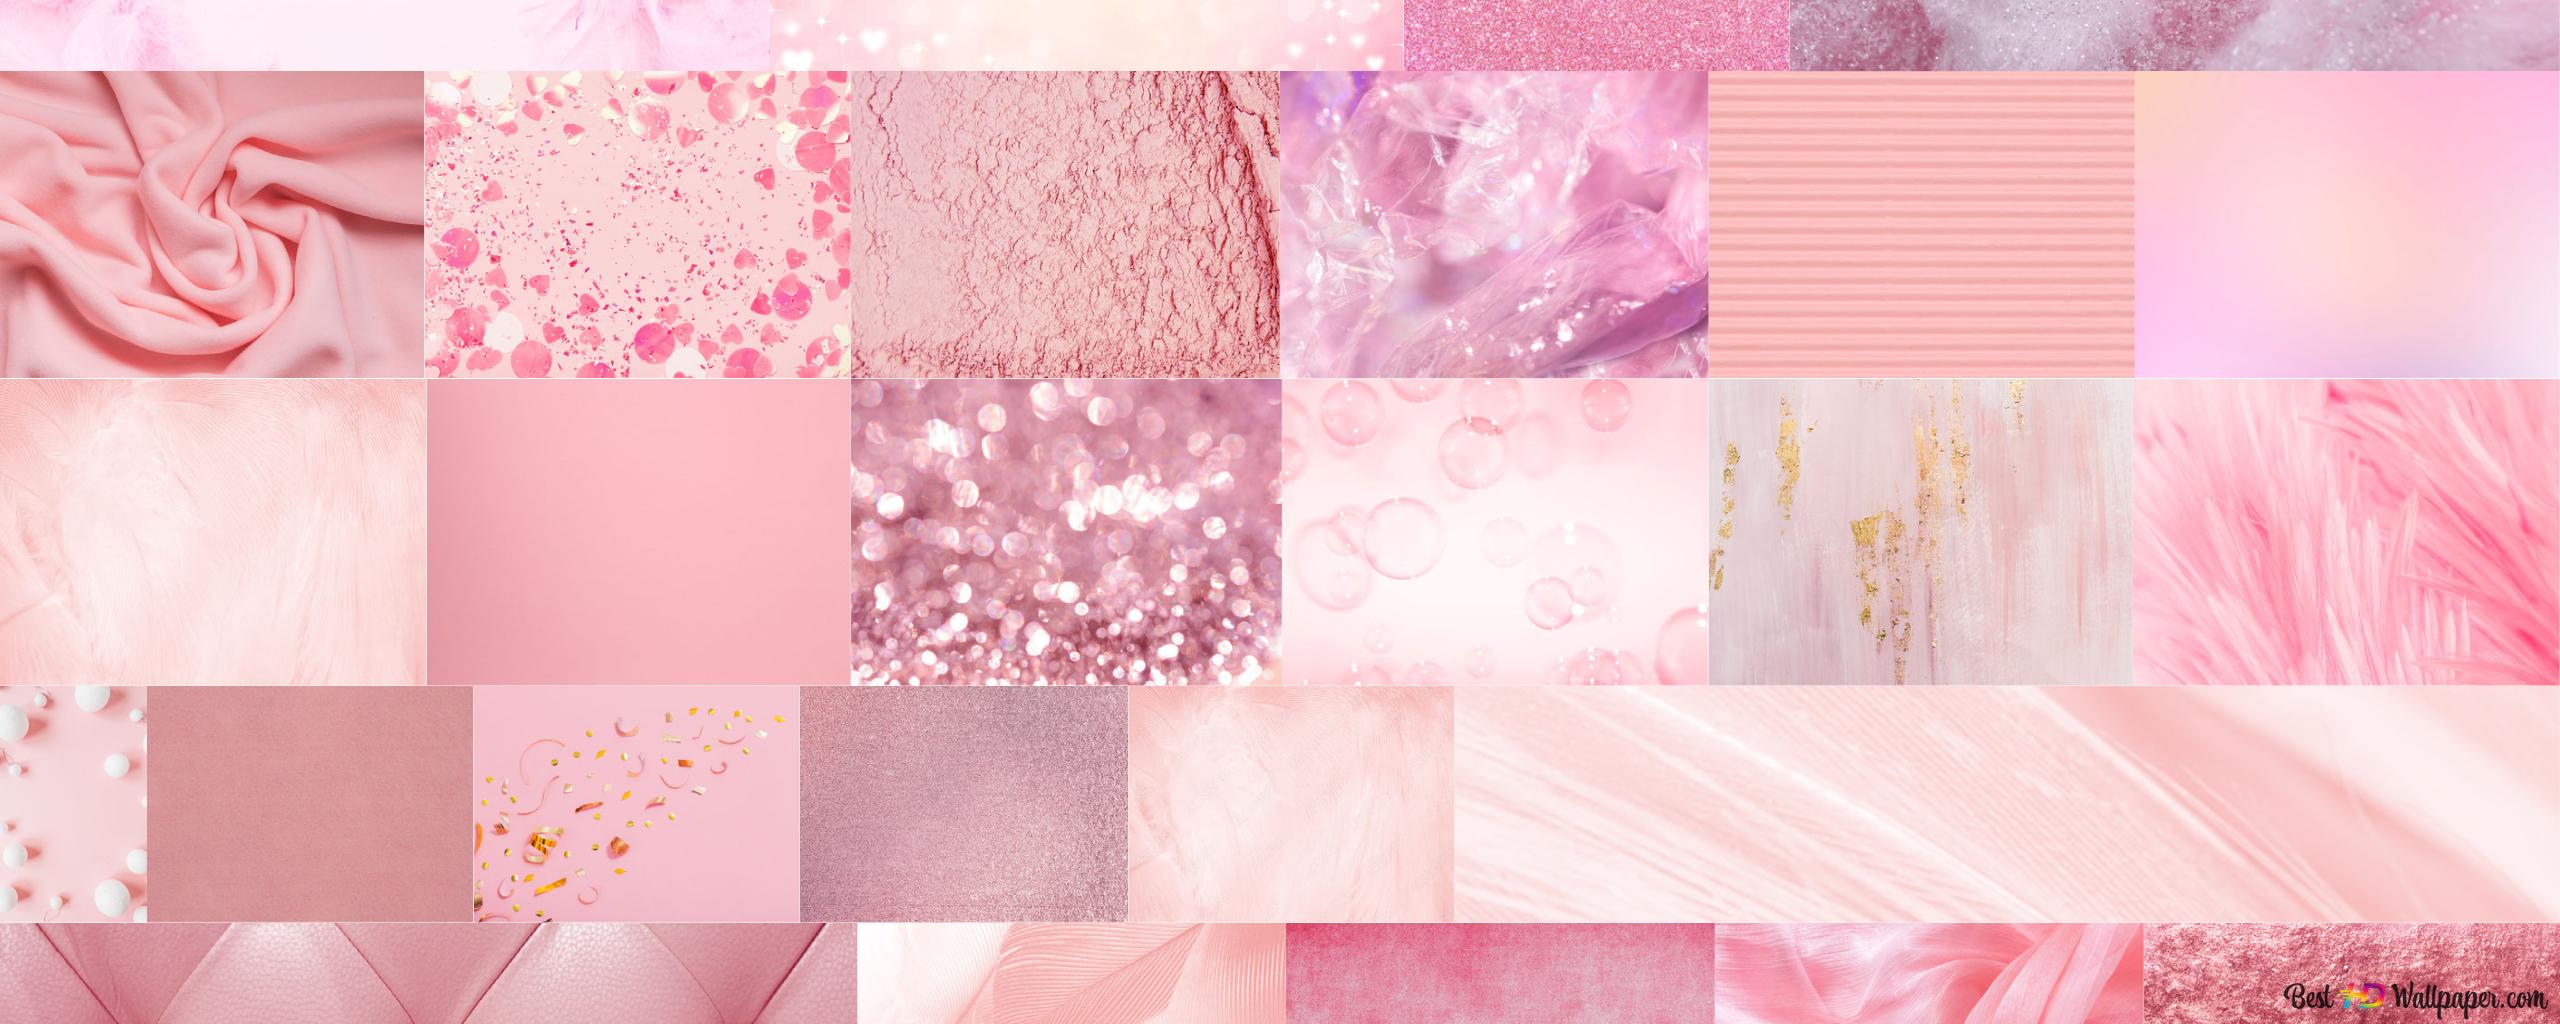 A collage of pink and white fabrics - Soft pink, light pink